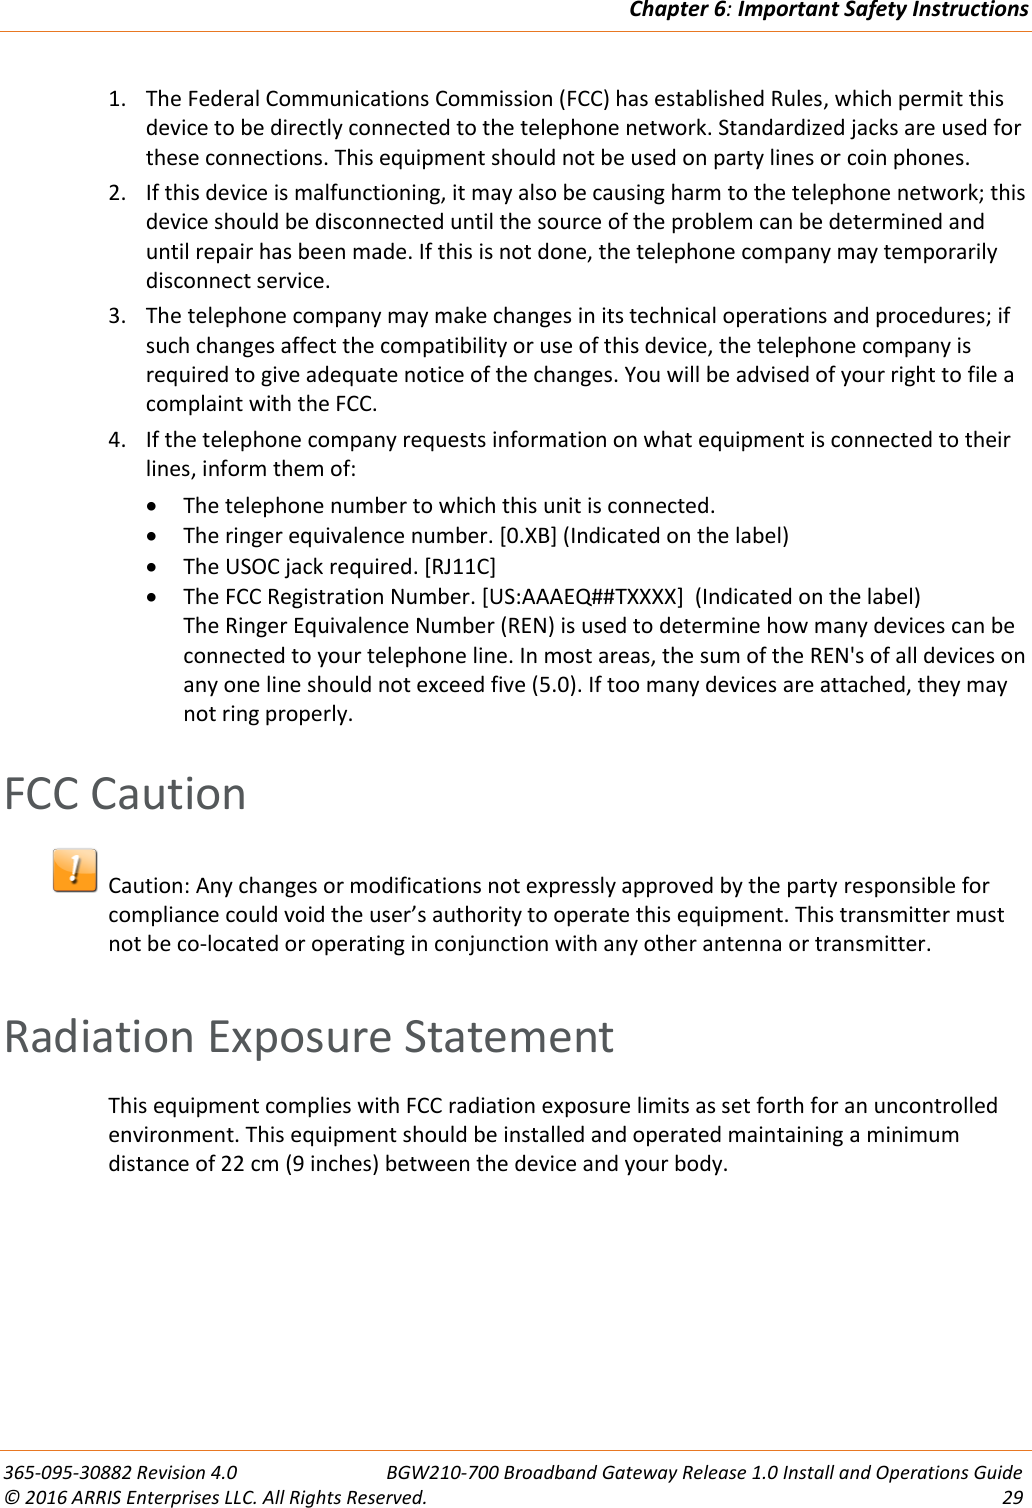 Chapter 6: Important Safety Instructions  365-095-30882 Revision 4.0  BGW210-700 Broadband Gateway Release 1.0 Install and Operations Guide © 2016 ARRIS Enterprises LLC. All Rights Reserved.  29  1. The Federal Communications Commission (FCC) has established Rules, which permit this device to be directly connected to the telephone network. Standardized jacks are used for these connections. This equipment should not be used on party lines or coin phones. 2. If this device is malfunctioning, it may also be causing harm to the telephone network; this device should be disconnected until the source of the problem can be determined and until repair has been made. If this is not done, the telephone company may temporarily disconnect service. 3. The telephone company may make changes in its technical operations and procedures; if such changes affect the compatibility or use of this device, the telephone company is required to give adequate notice of the changes. You will be advised of your right to file a complaint with the FCC. 4. If the telephone company requests information on what equipment is connected to their lines, inform them of:  The telephone number to which this unit is connected.  The ringer equivalence number. [0.XB] (Indicated on the label)  The USOC jack required. [RJ11C]  The FCC Registration Number. [US:AAAEQ##TXXXX]  (Indicated on the label) The Ringer Equivalence Number (REN) is used to determine how many devices can be connected to your telephone line. In most areas, the sum of the REN&apos;s of all devices on any one line should not exceed five (5.0). If too many devices are attached, they may not ring properly.   FCC Caution   Caution: Any changes or modifications not expressly approved by the party responsible for compliance could void the user’s authority to operate this equipment. This transmitter must not be co-located or operating in conjunction with any other antenna or transmitter.    Radiation Exposure Statement This equipment complies with FCC radiation exposure limits as set forth for an uncontrolled environment. This equipment should be installed and operated maintaining a minimum distance of 22 cm (9 inches) between the device and your body.   